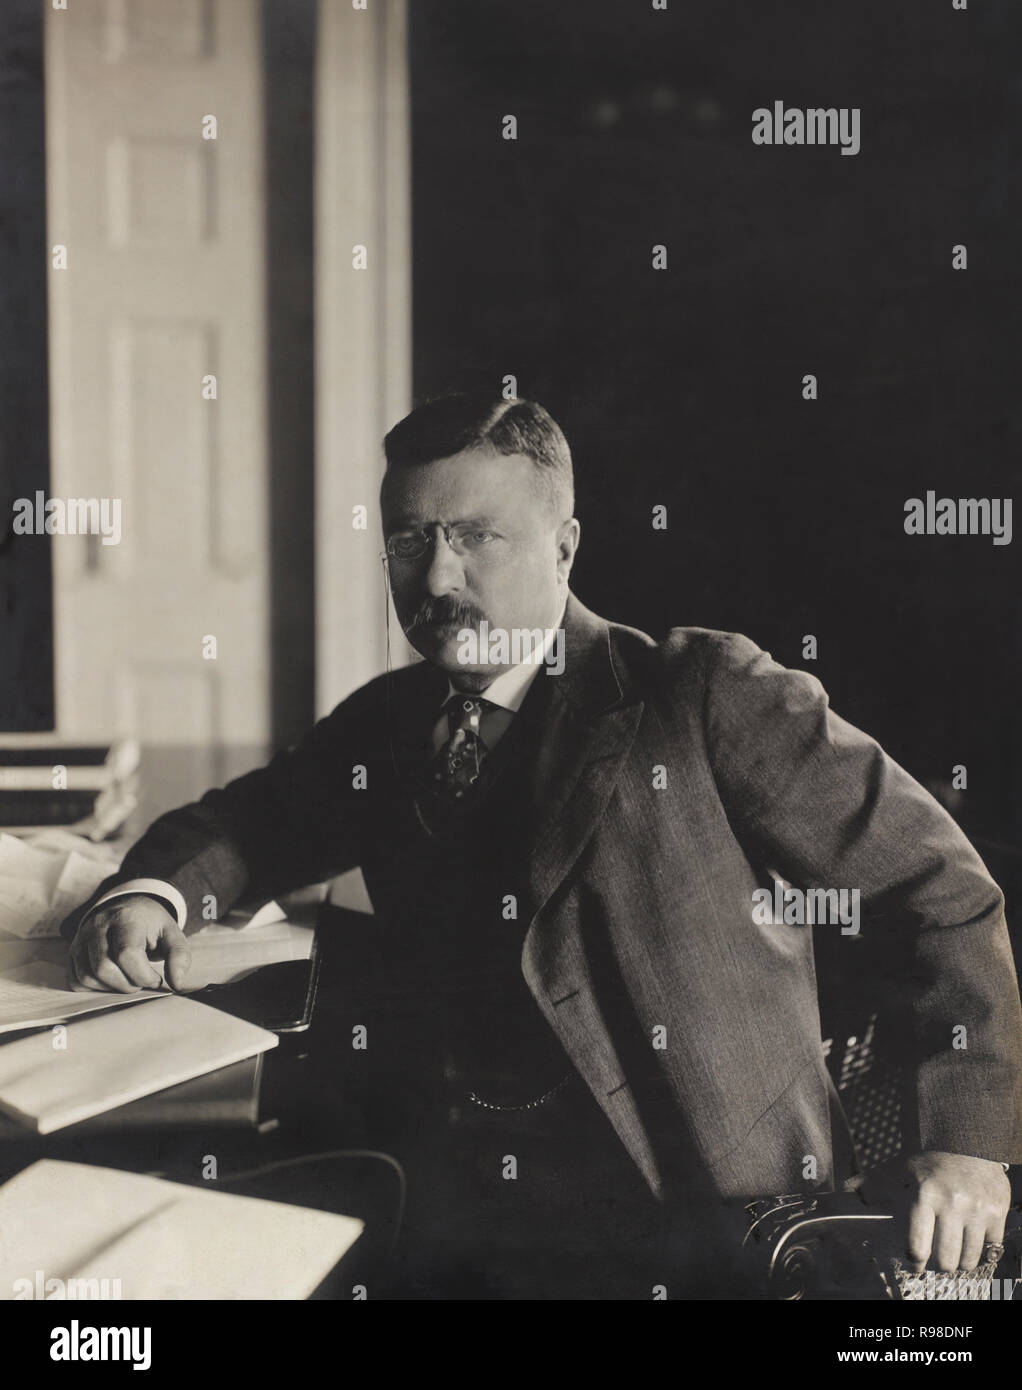 U.S. President Theodore Roosevelt, Seated Portrait at Desk in his new Office, Washington DC, USA, by Barnett McFee Clinedinst, February 10, 1903 Stock Photo